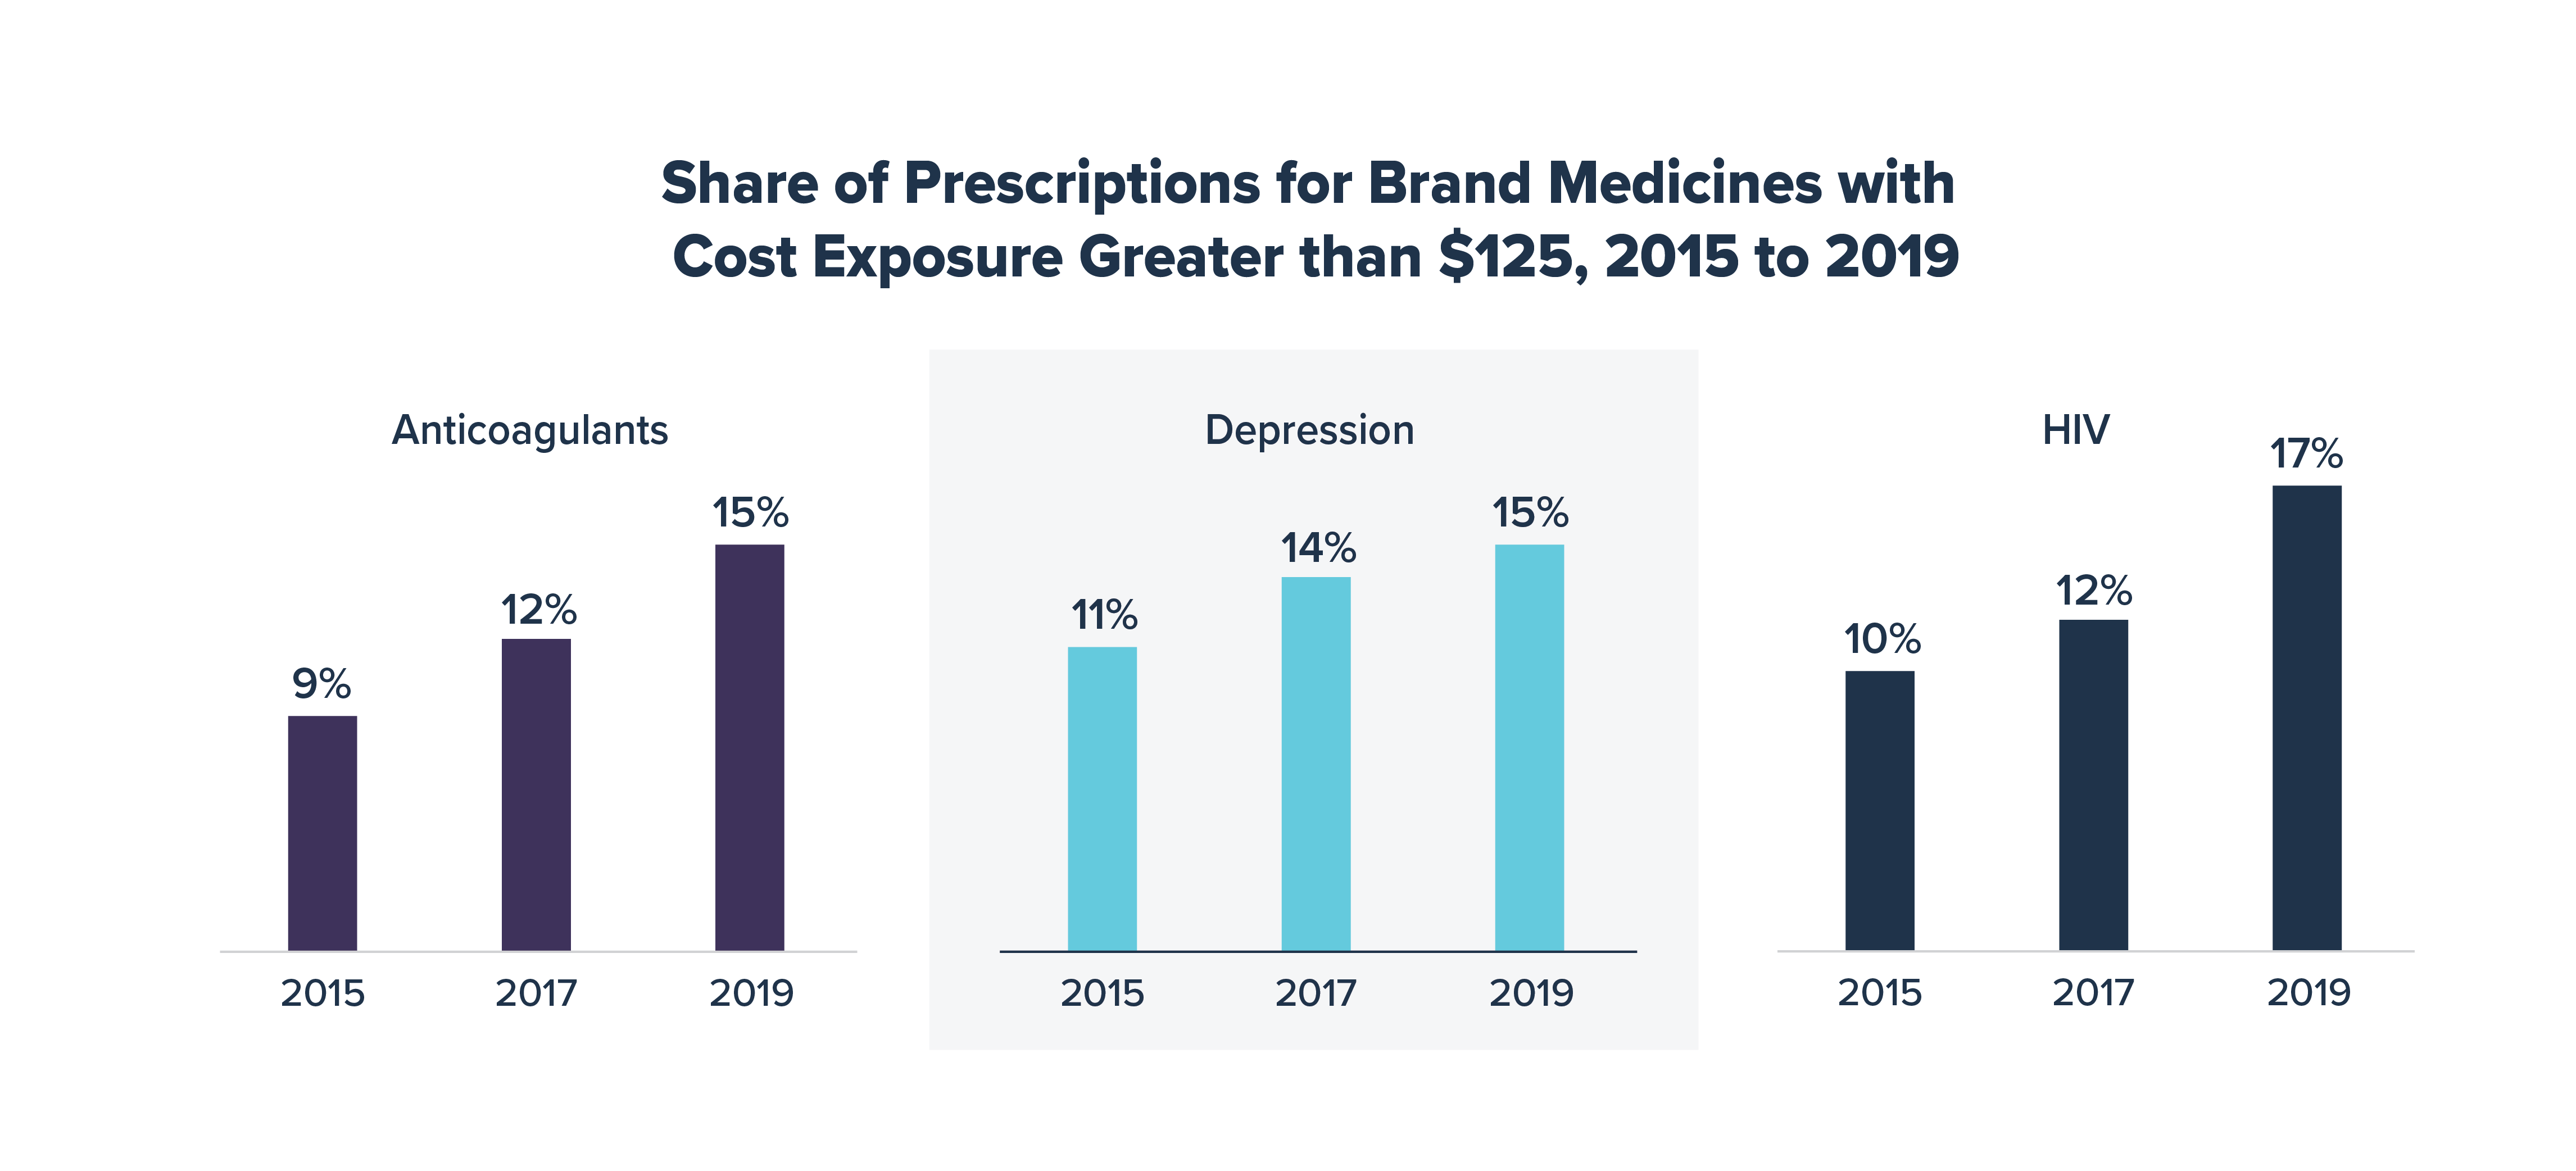 Share of Prescriptions for Brand Medicines with Cost Exposure Greater than $125